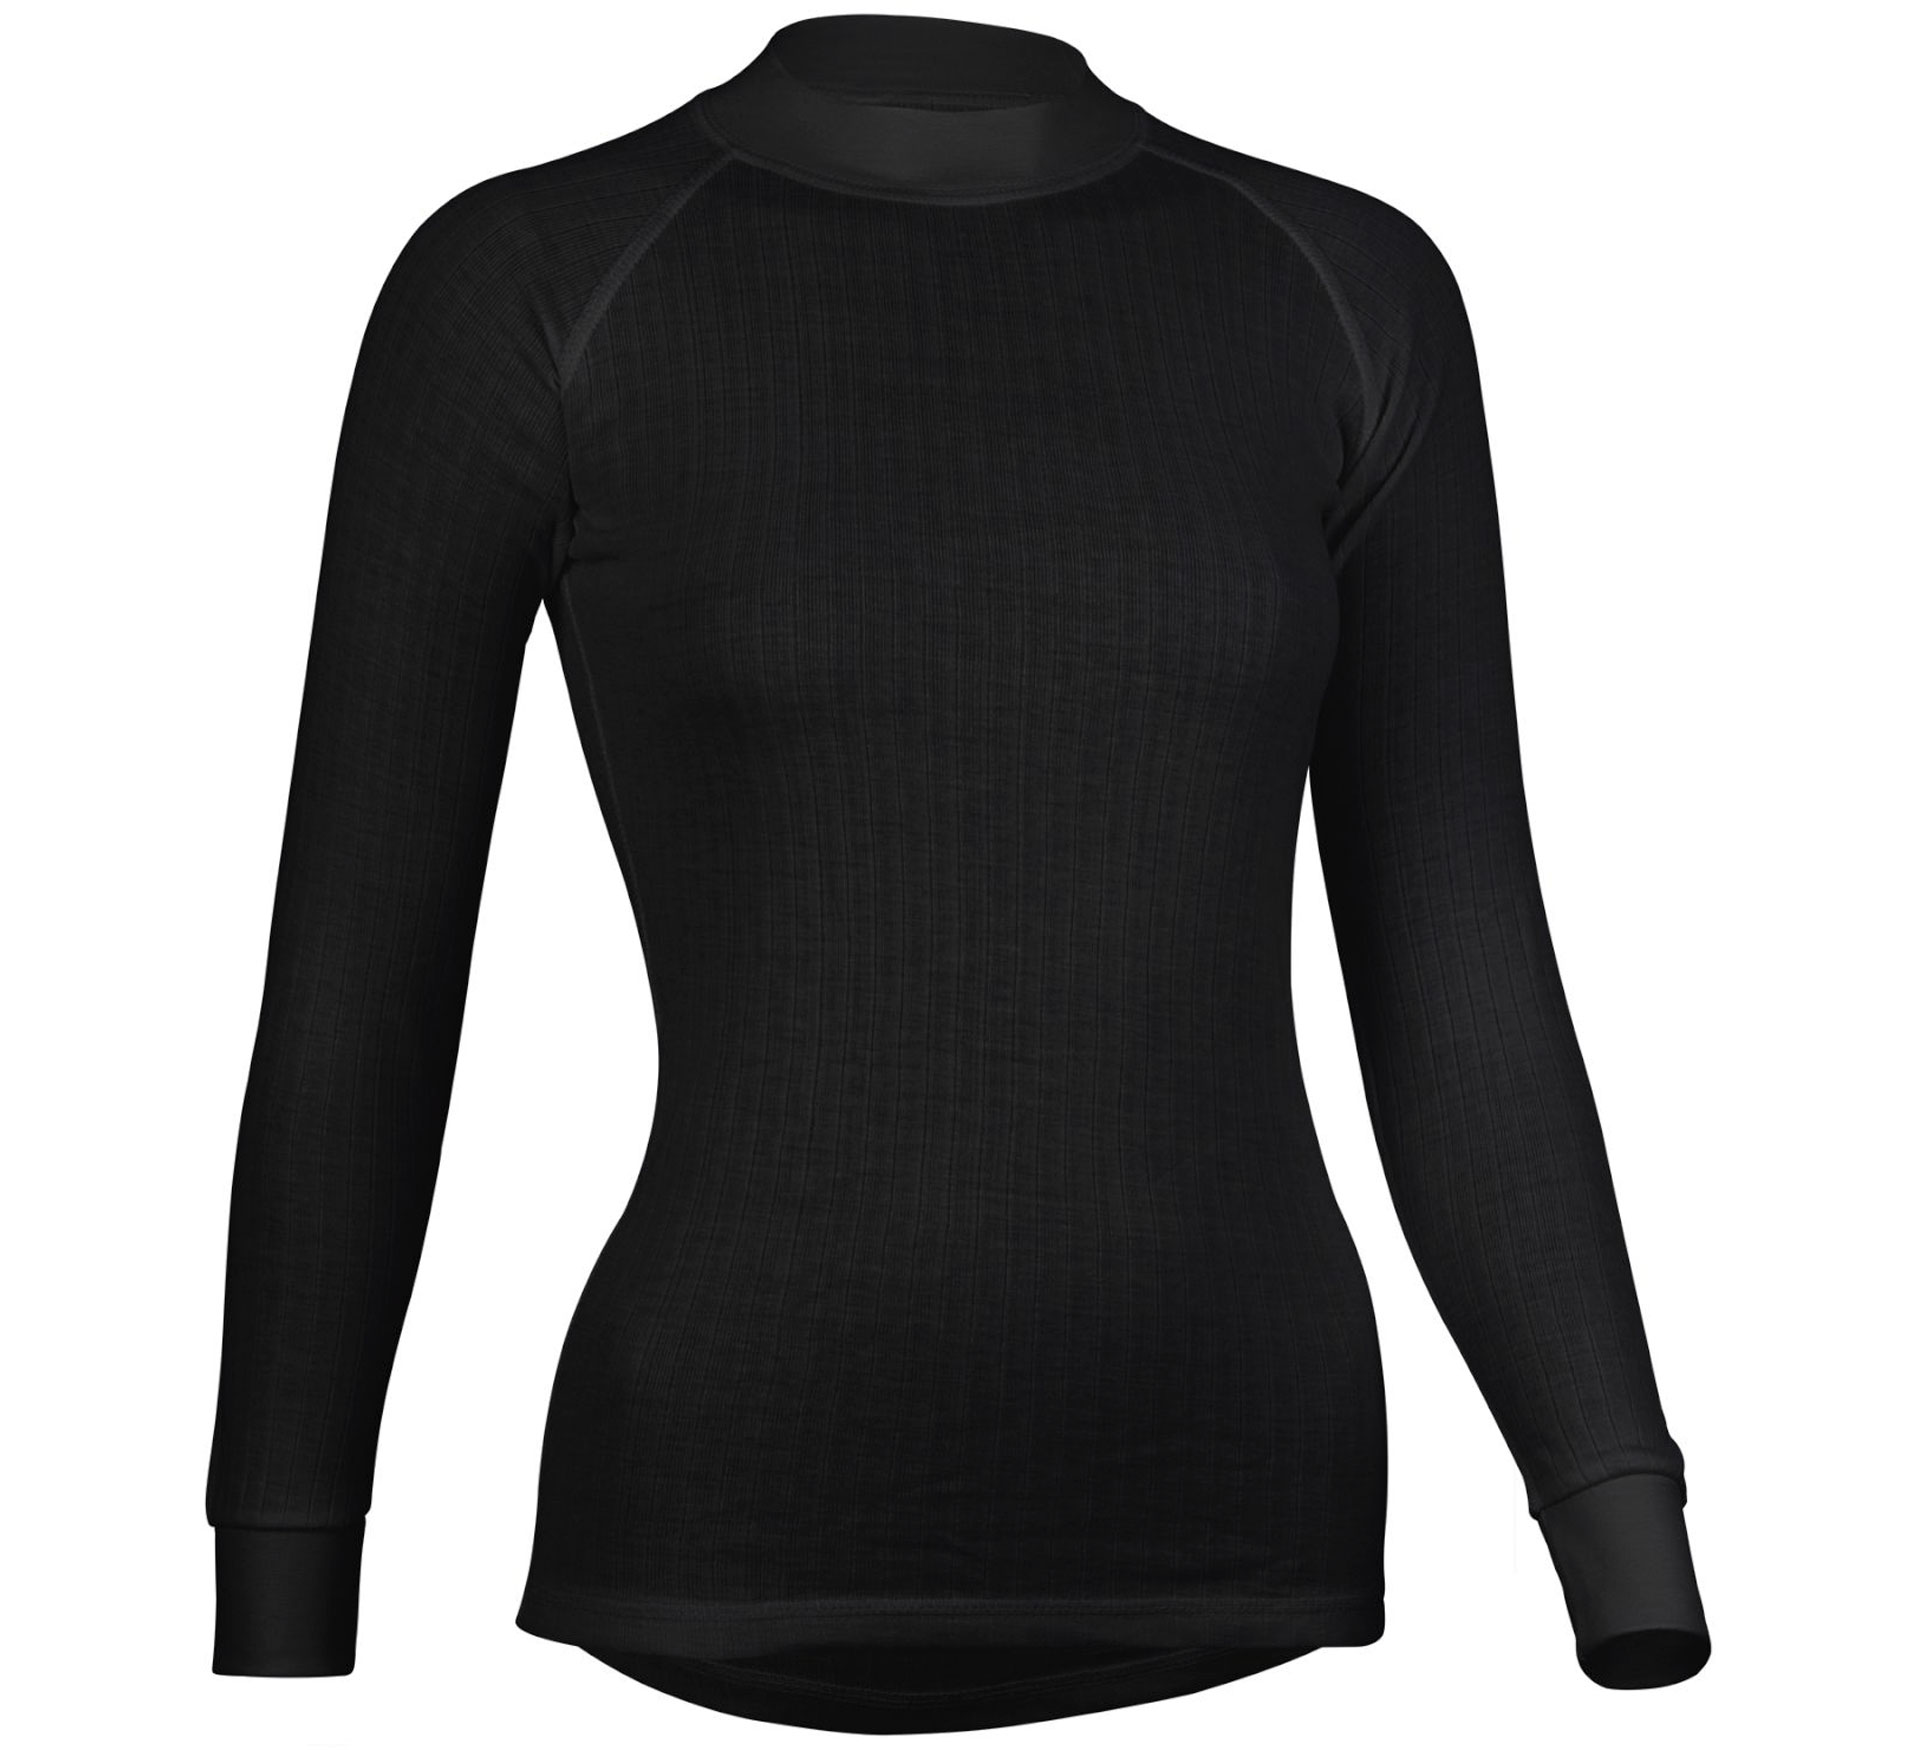 Avento Thermoshirt (manches longues) Femme